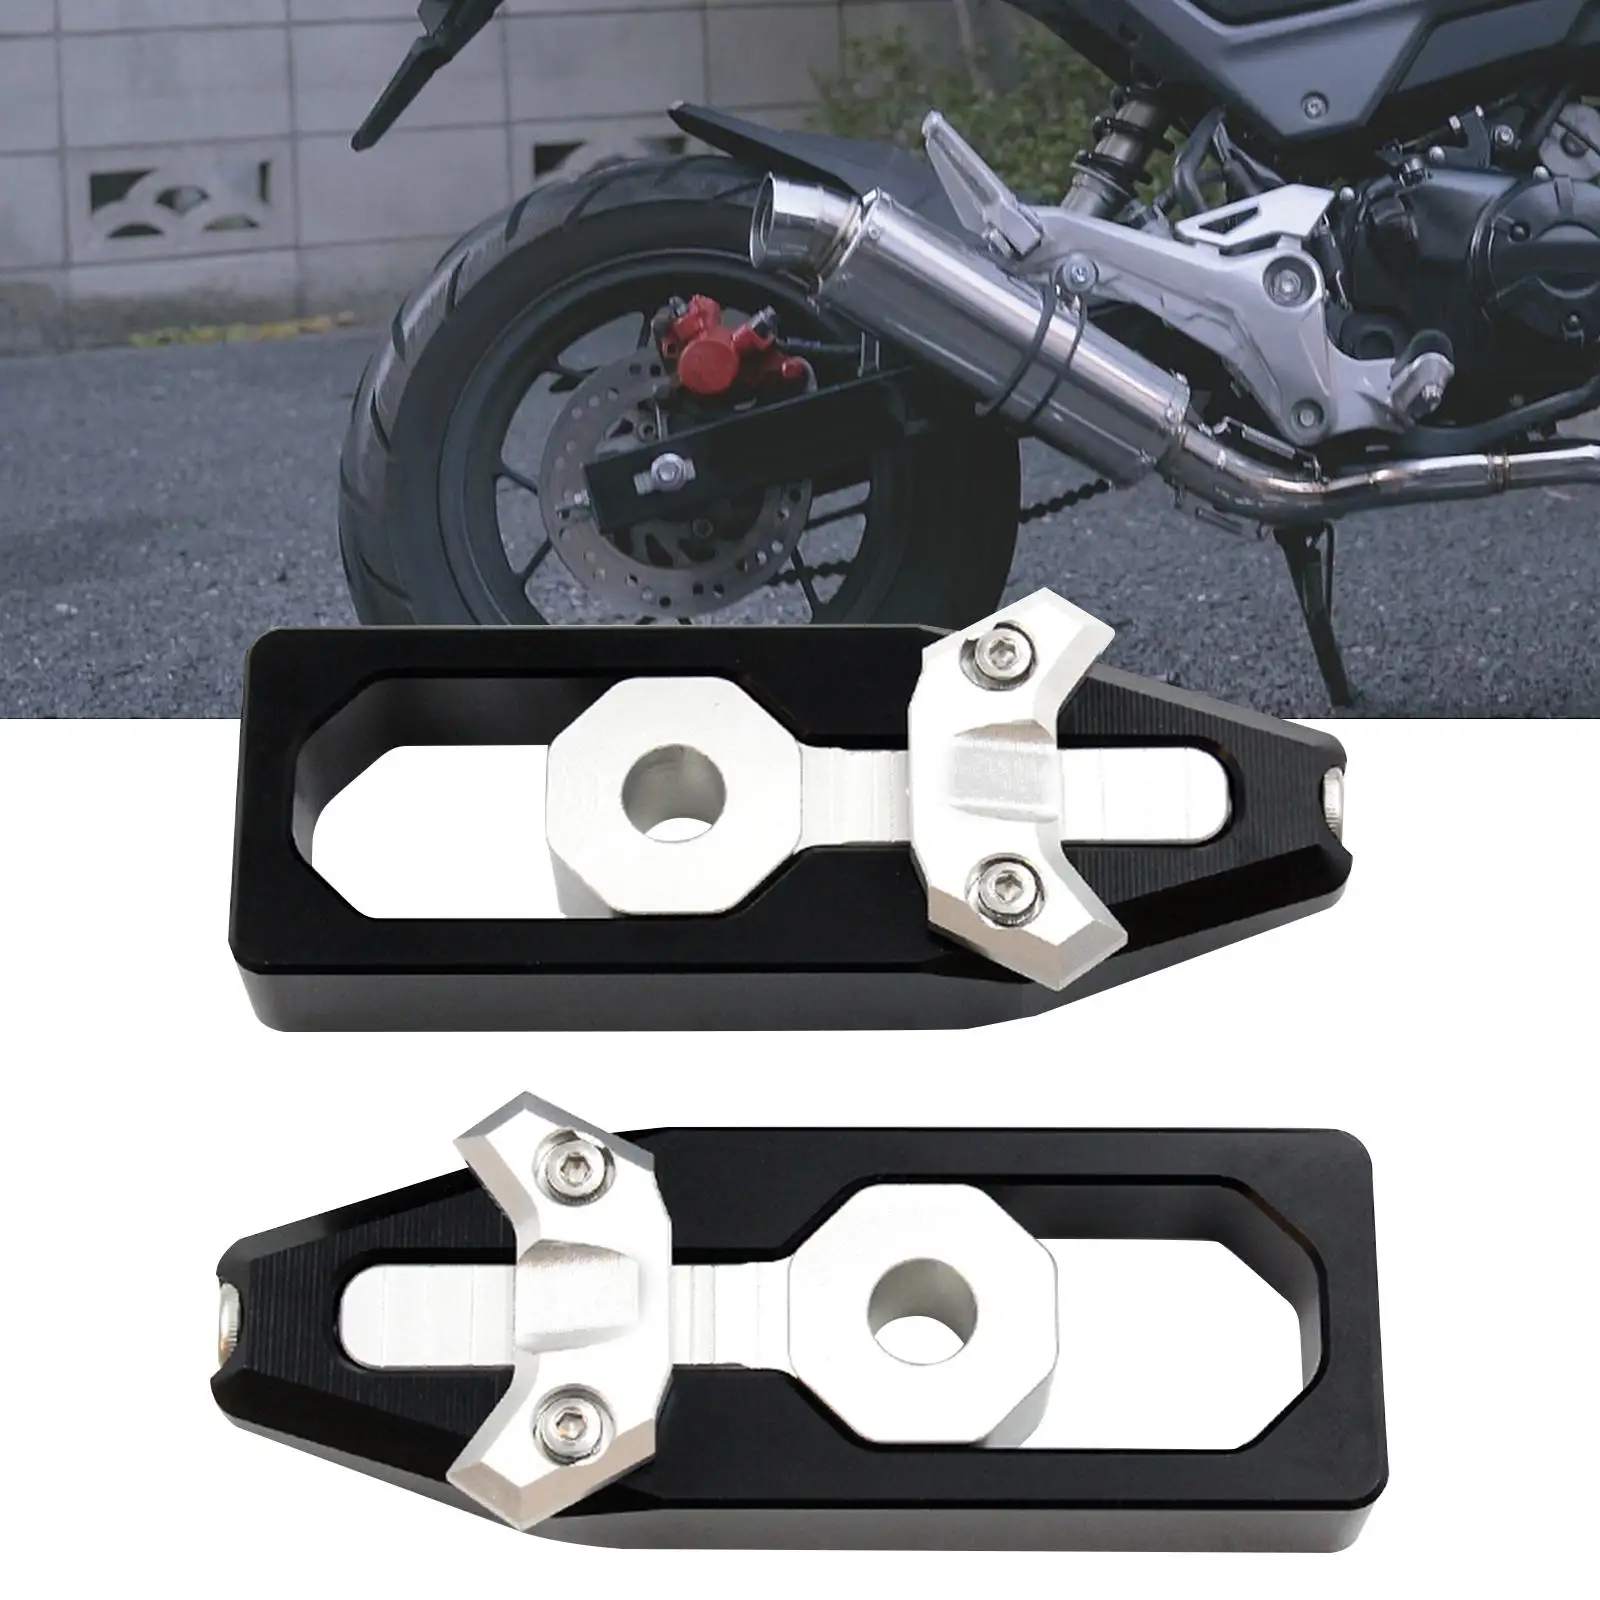 2 Pieces Chain Adjuster Simple Installation Durable Multipurpose Portable Motor